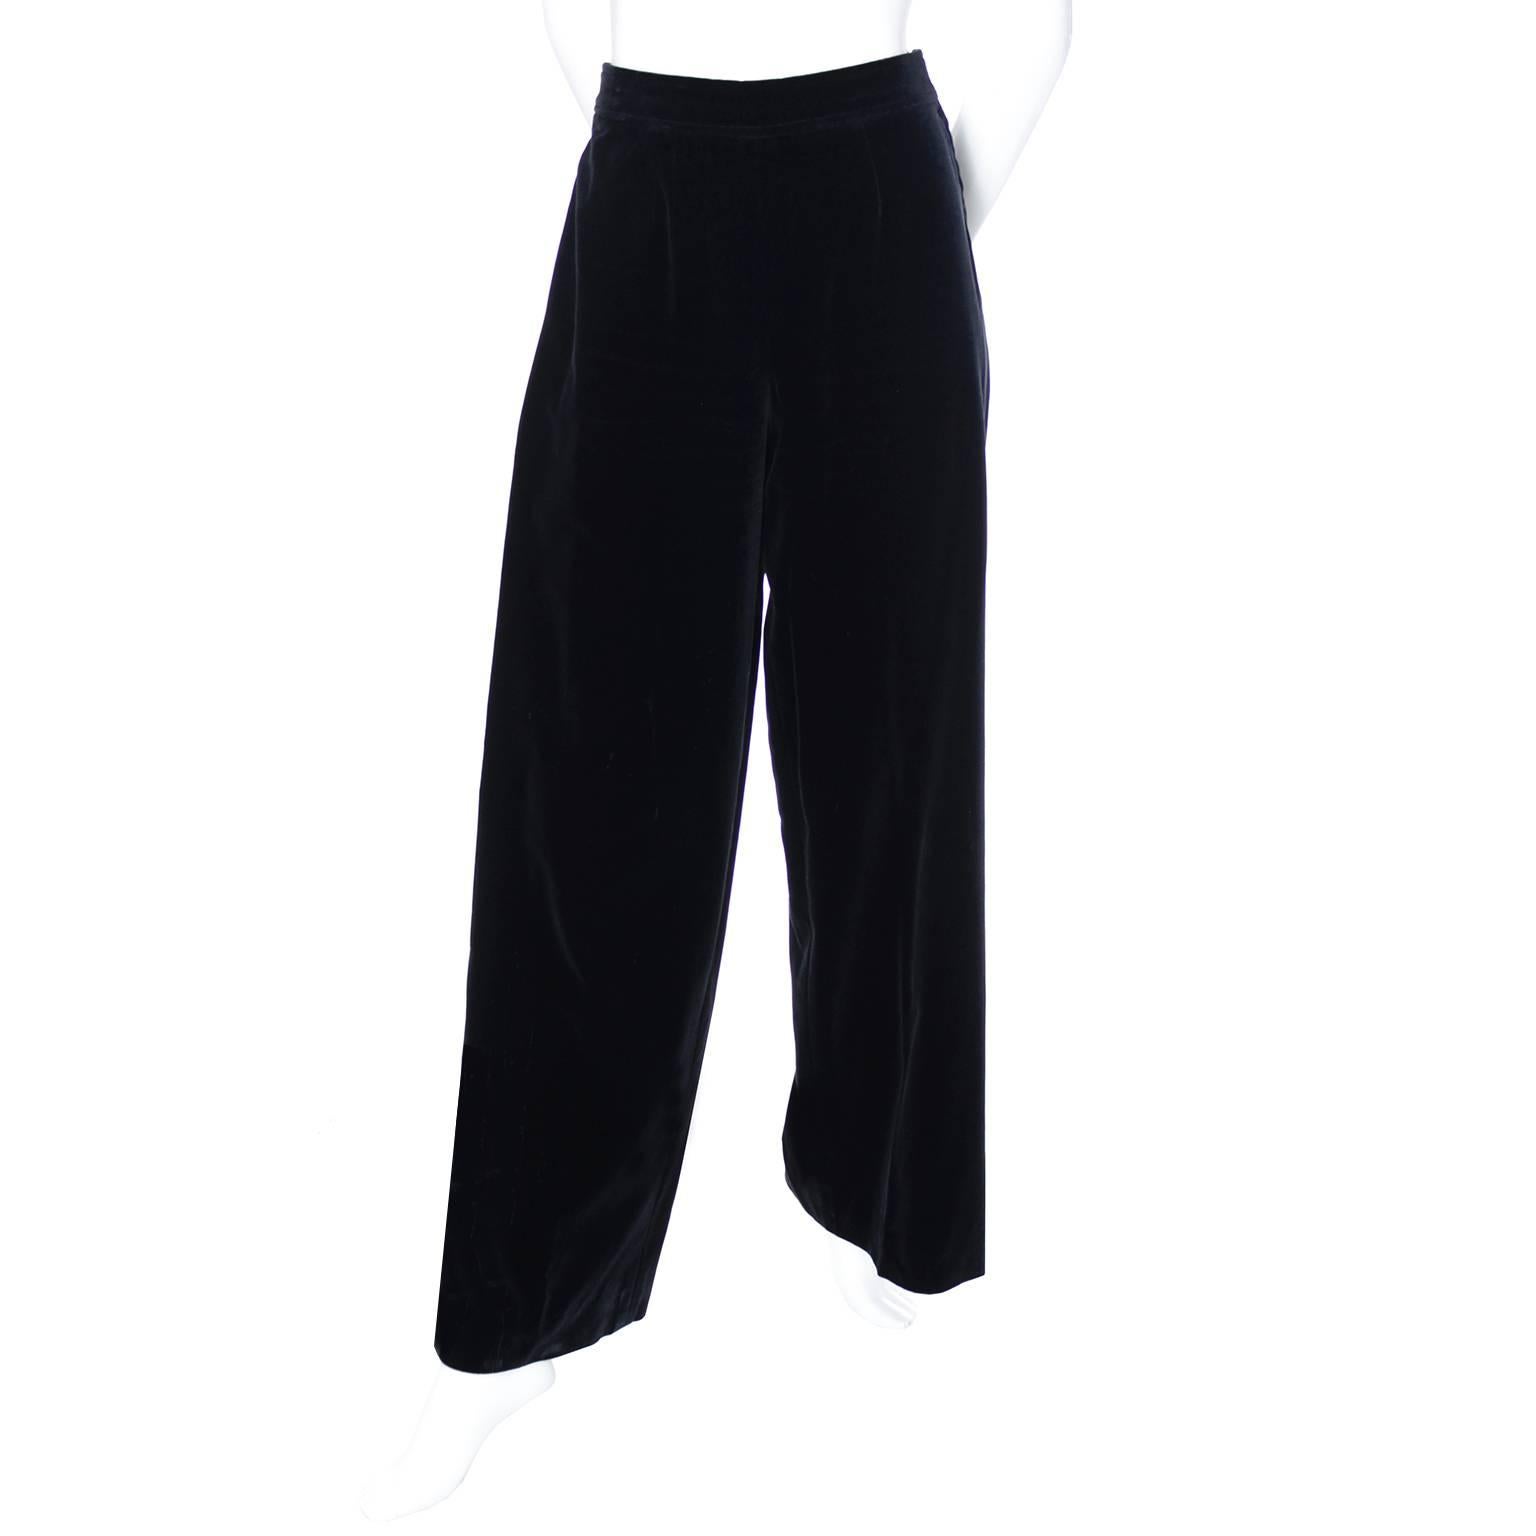 Beautiful YSL vintage black velvet high waisted pants with wide legs.  These pants were purchased at I Magnin in the late 1970's and have a side metal zipper and the signature Yves Saint Laurent hook and eye.  These would be perfect to wear with a